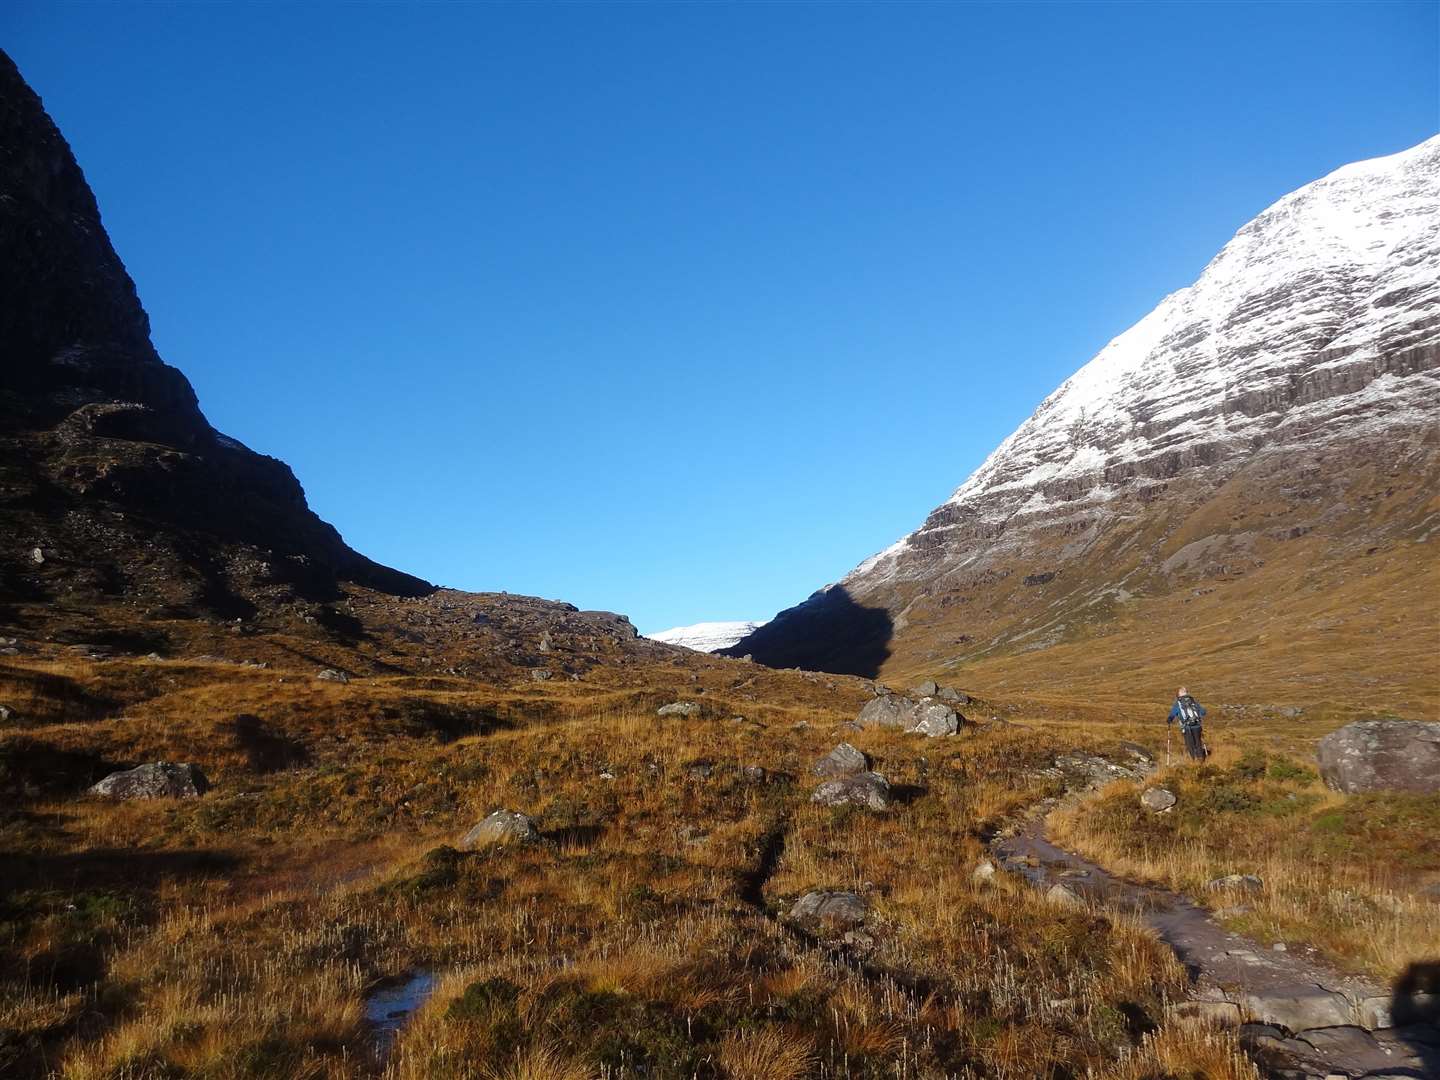 The path to Coire Mhic Fhearchair between Liathach and Beinn Eighe in Torridon. Picture: John Davidson